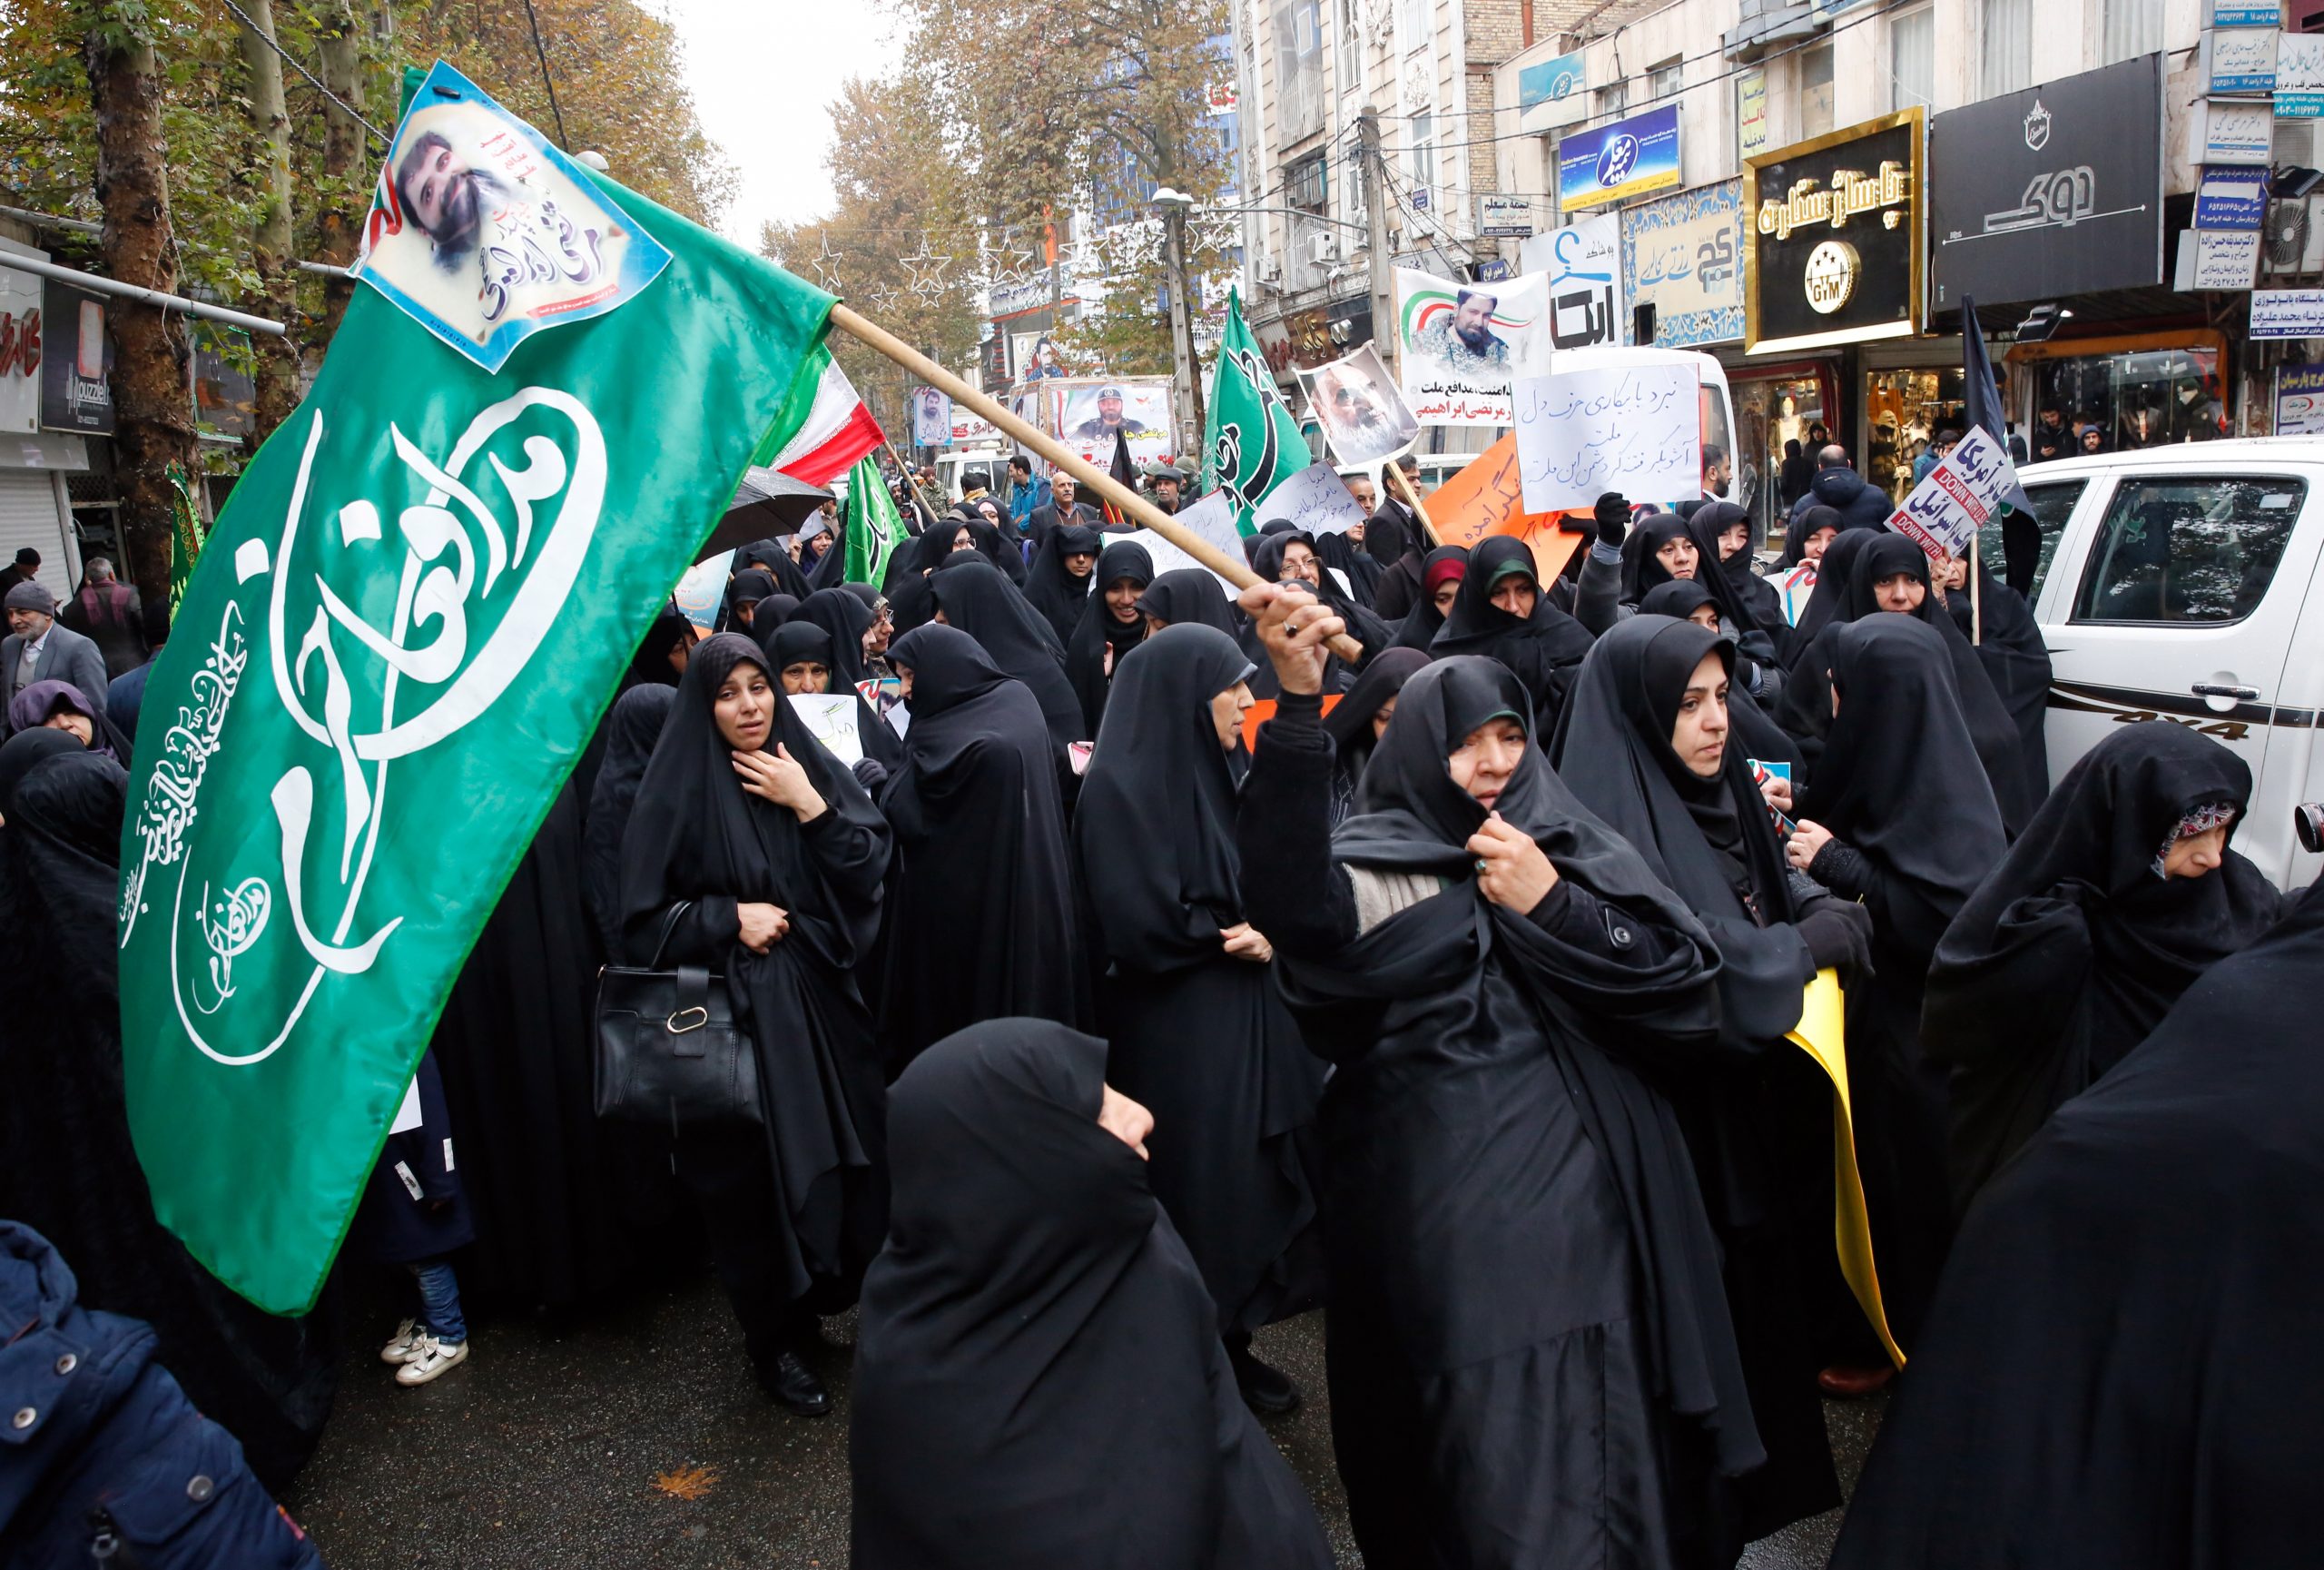 epa08010937 Iranian women take part in a funeral ceremony in the city of Shahriar, Alborz province, Iran, 20 November 2019. Ebrahimi was killed during protests over increasing fuel prices last week. Iran on 15 November increased fuel prices by at least 50 percent prompting protests in different cities.  EPA/ABEDIN TAHERKENAREH